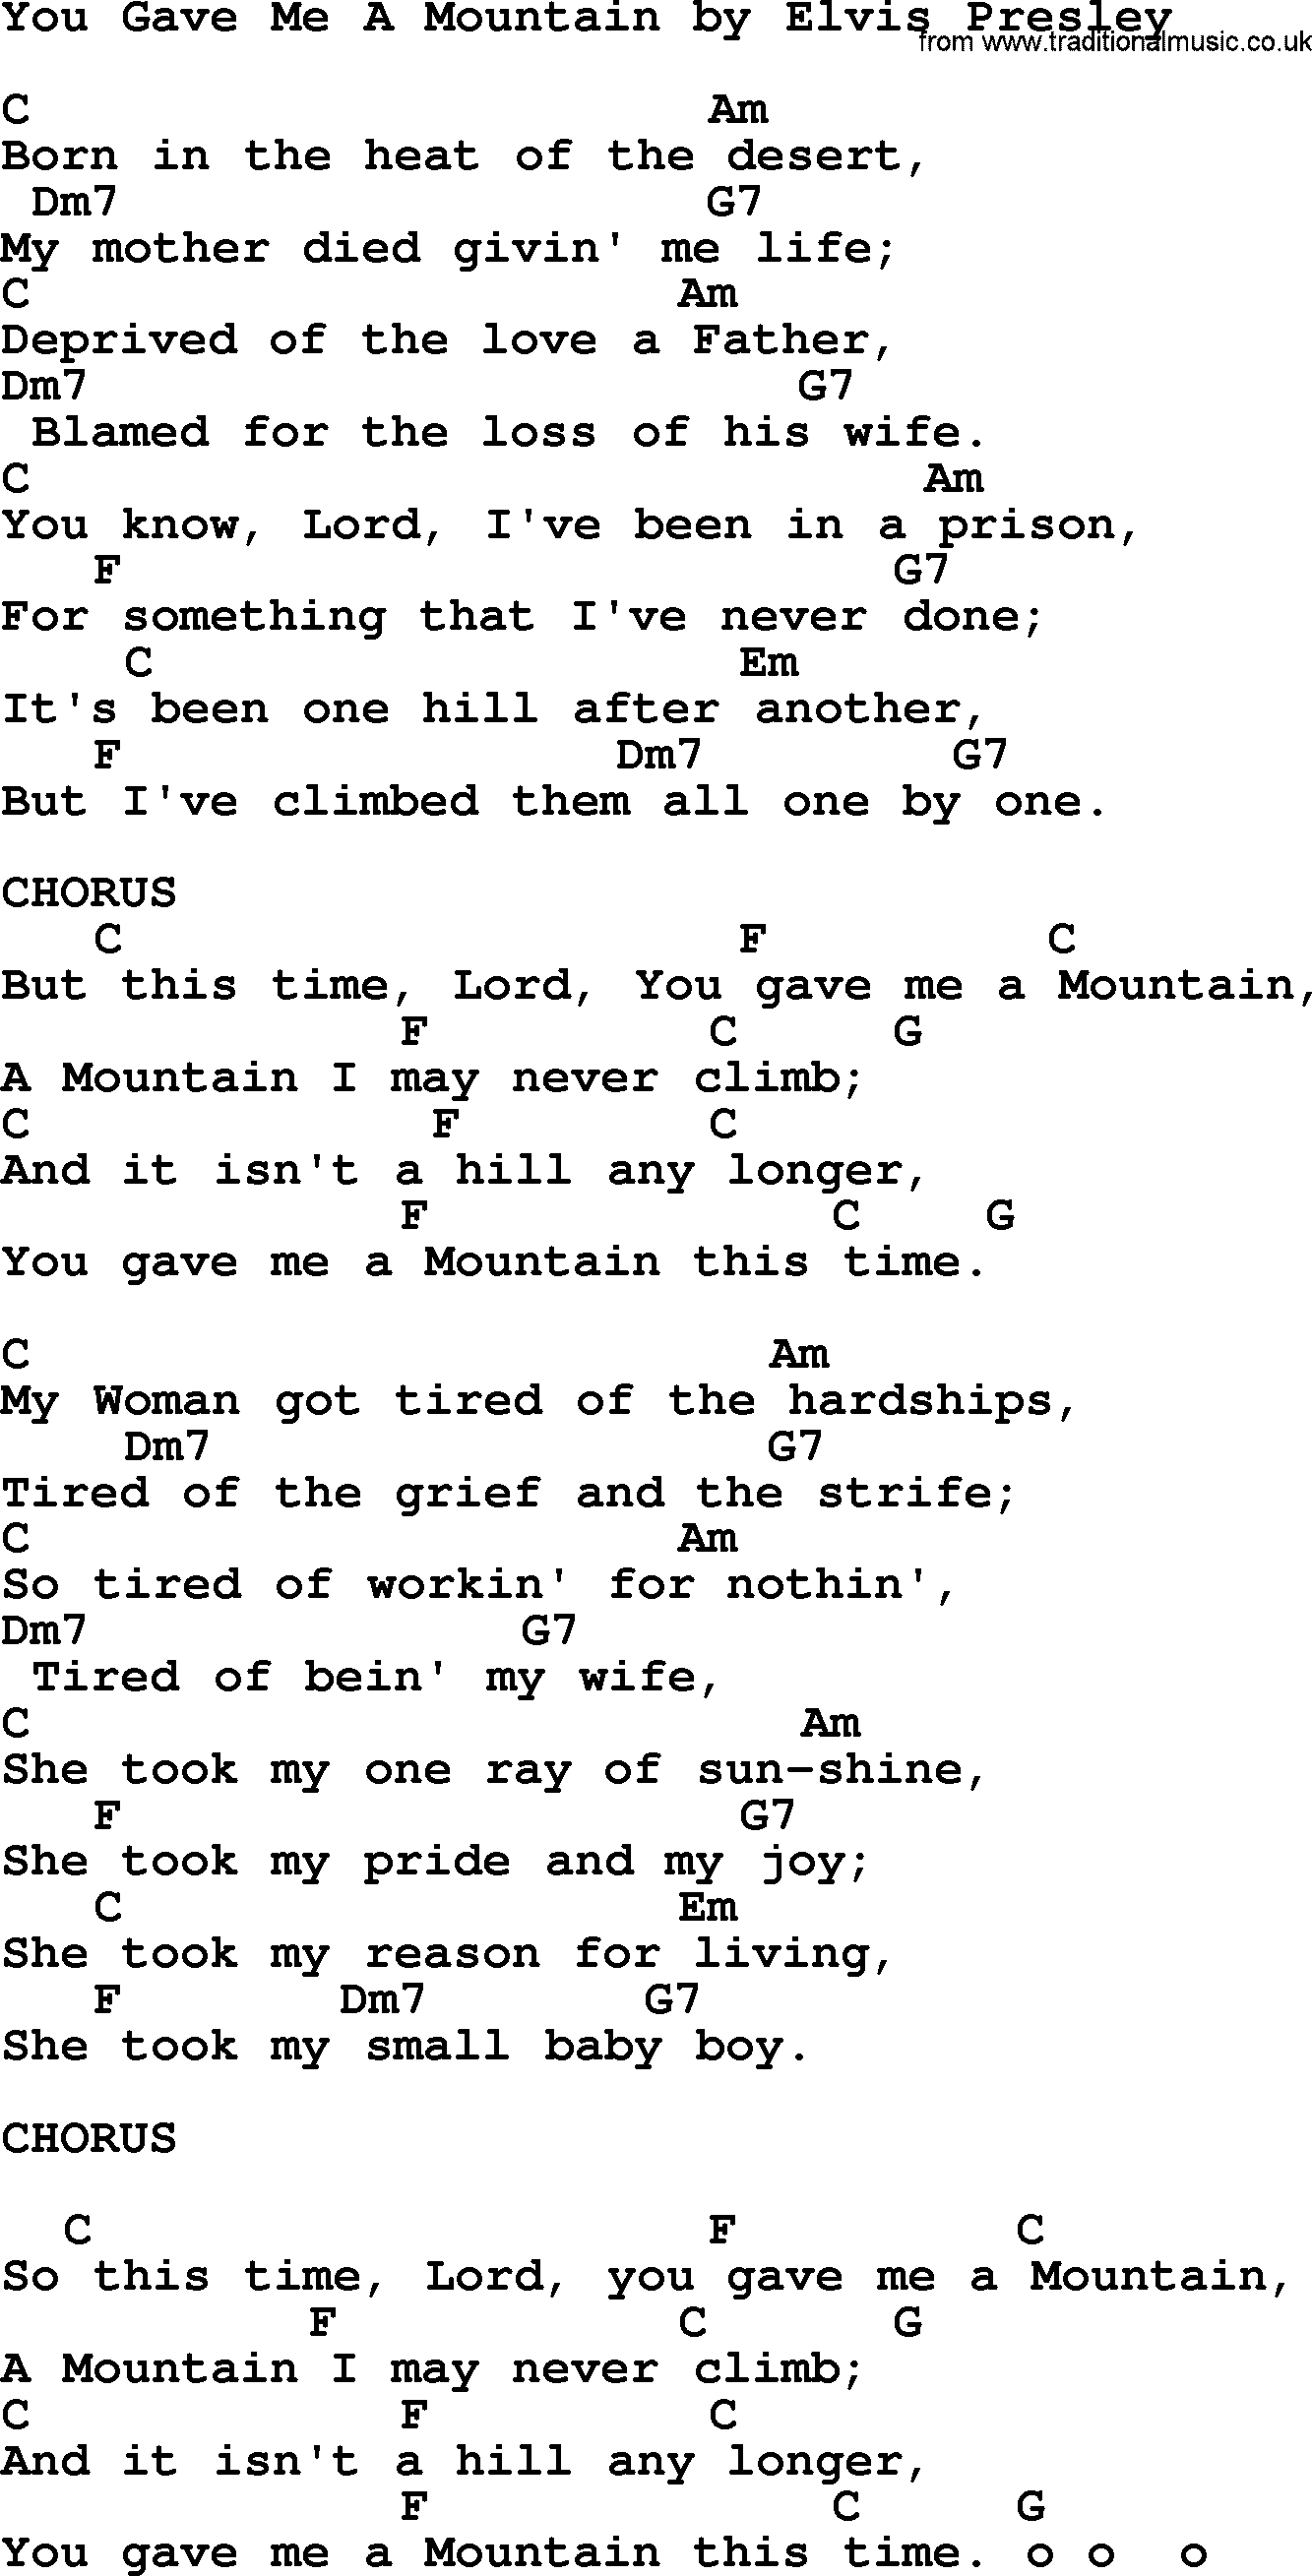 Elvis Presley song: You Gave Me A Mountain, lyrics and chords